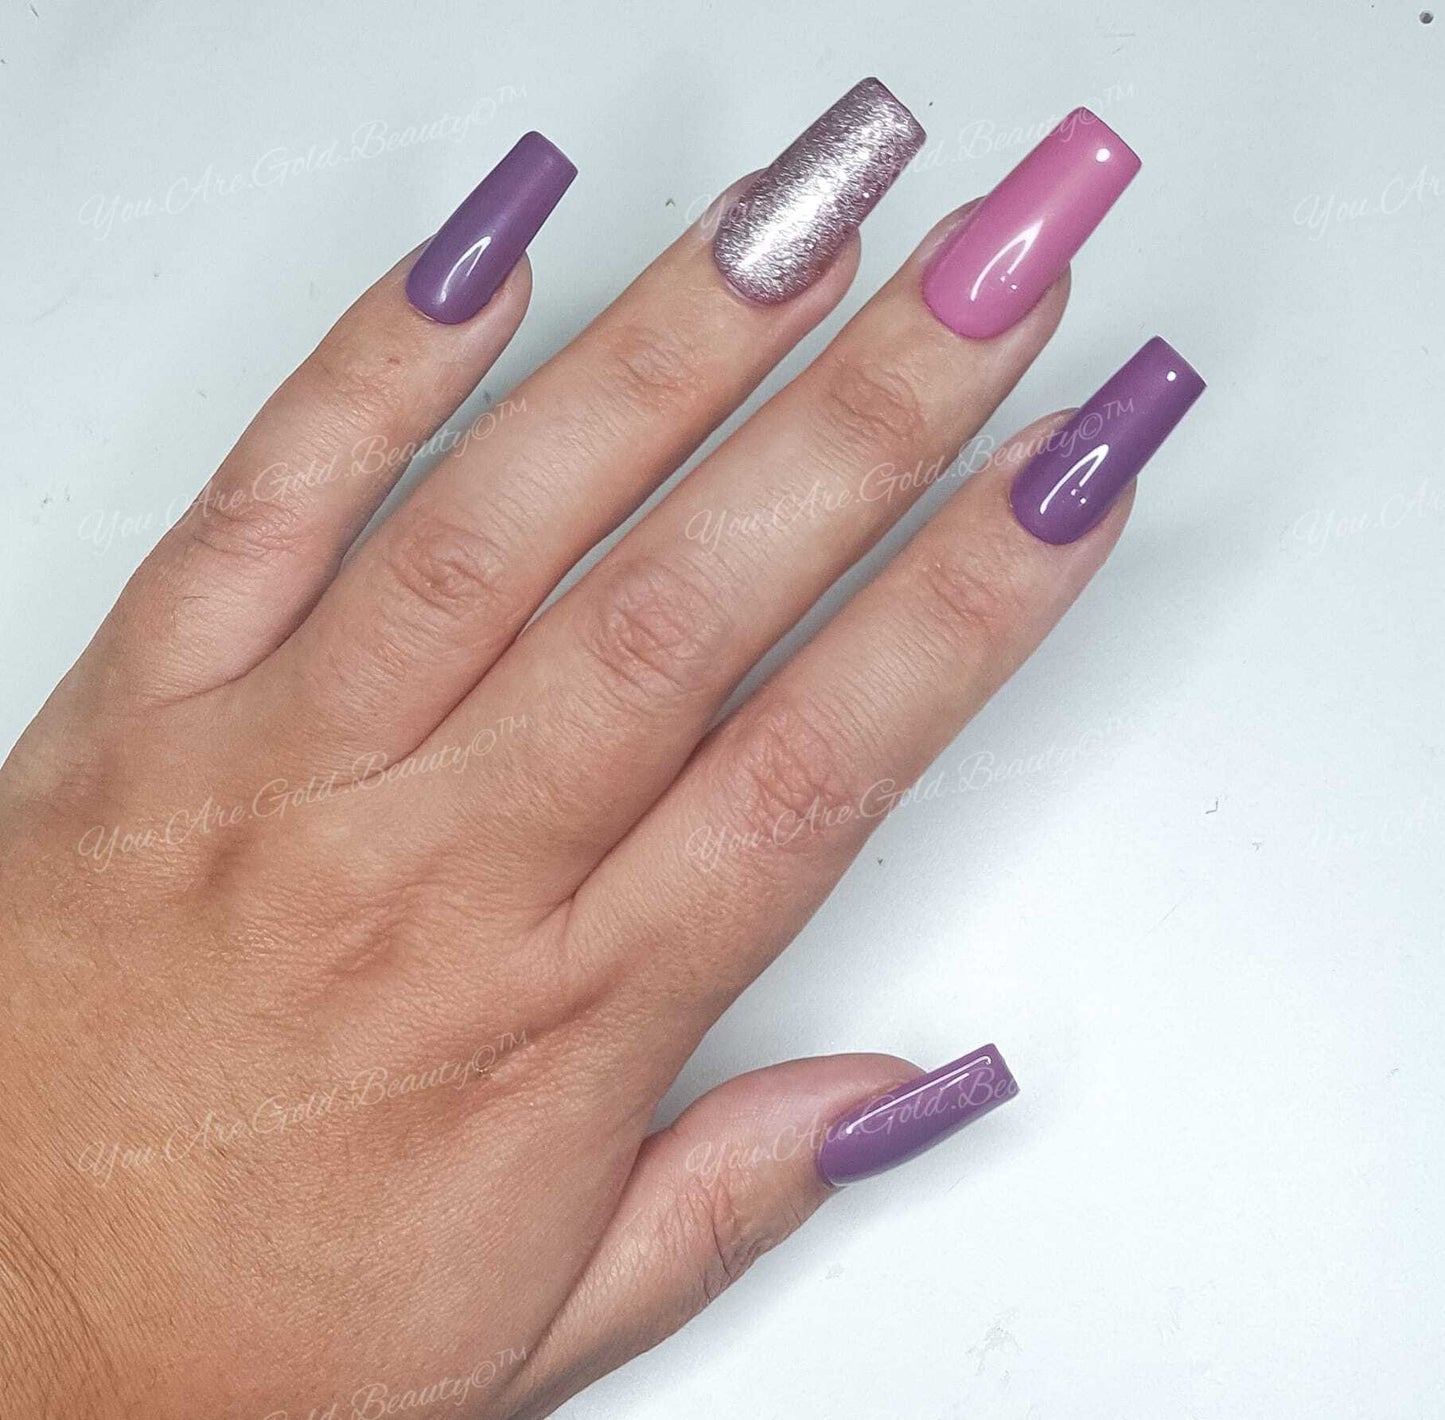 Square Shaped nails Mauve Purple Press On Nails with Shimmer Glitter Accent Nail. Purple nails, glitter nails, press on nails uk, square nails, square shaped nails, mauve nails, medium square nails, 